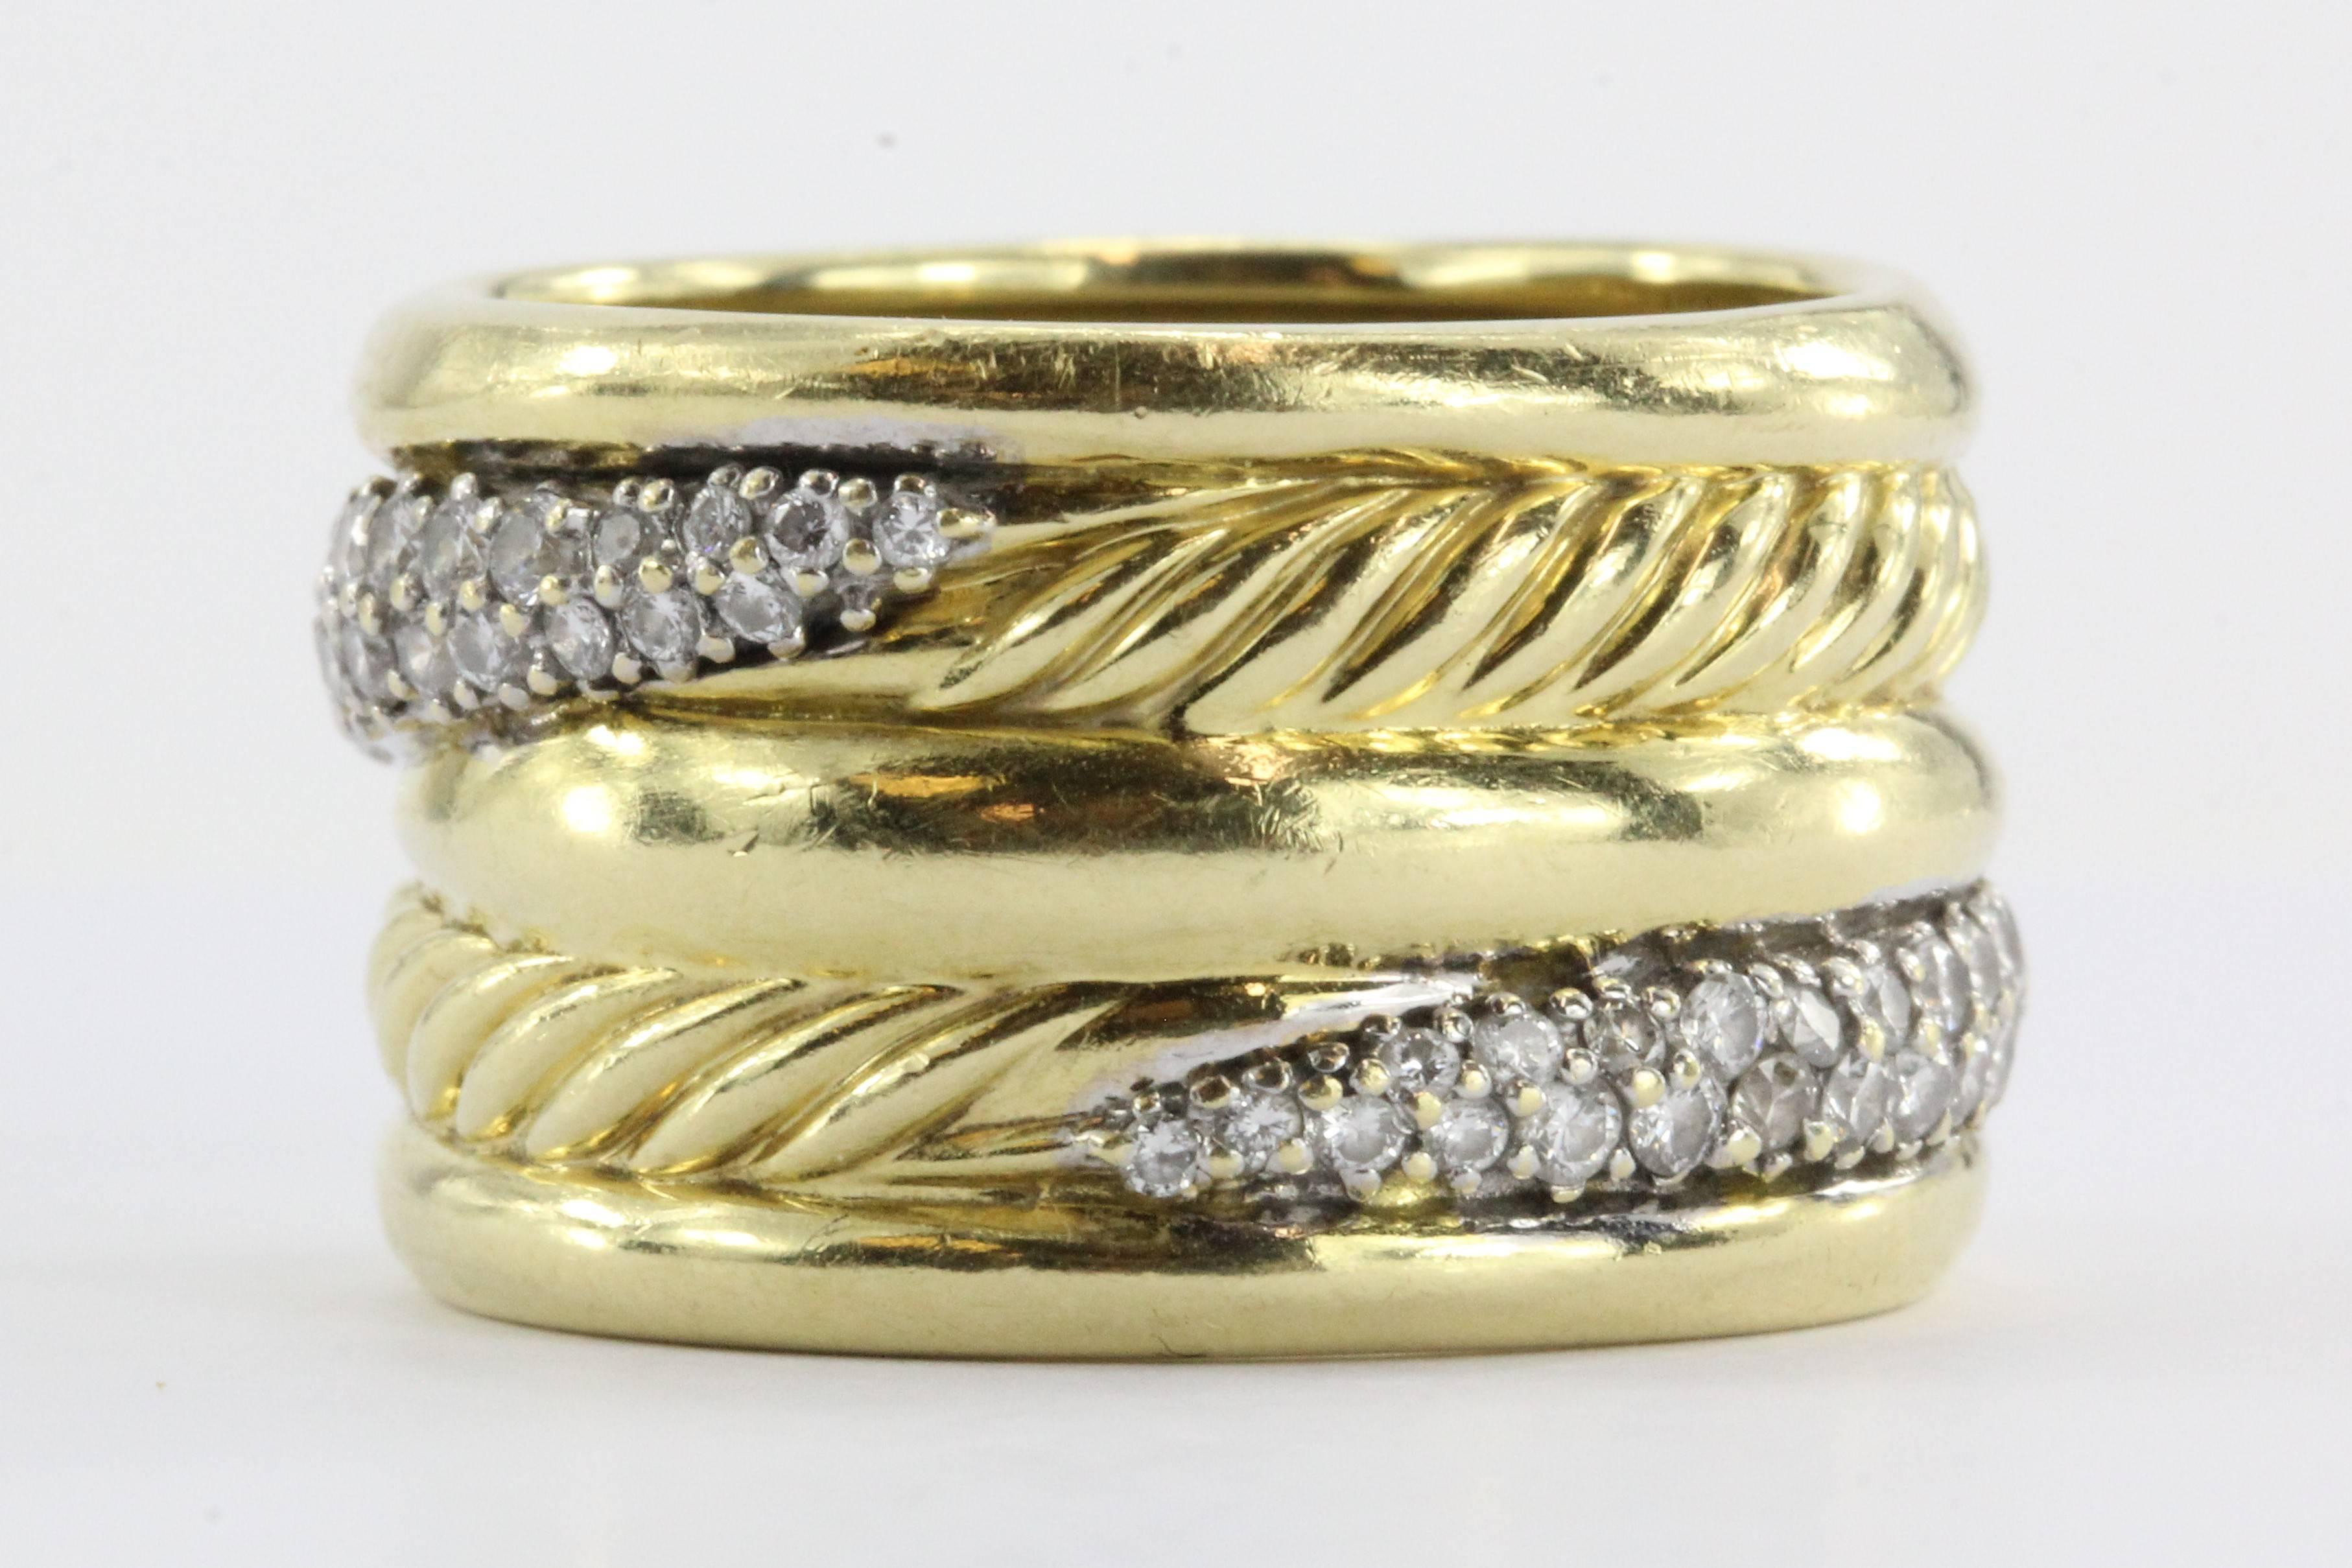 18K Yellow Gold & Diamond David Yurman Crossover 15mm Size 8 Ring Band. The ring is in excellent gently used estate condition and ready to wear. It is signed 750 D.Y. on the inside and set with approximately 1.2 carats of G color, Vs clarity